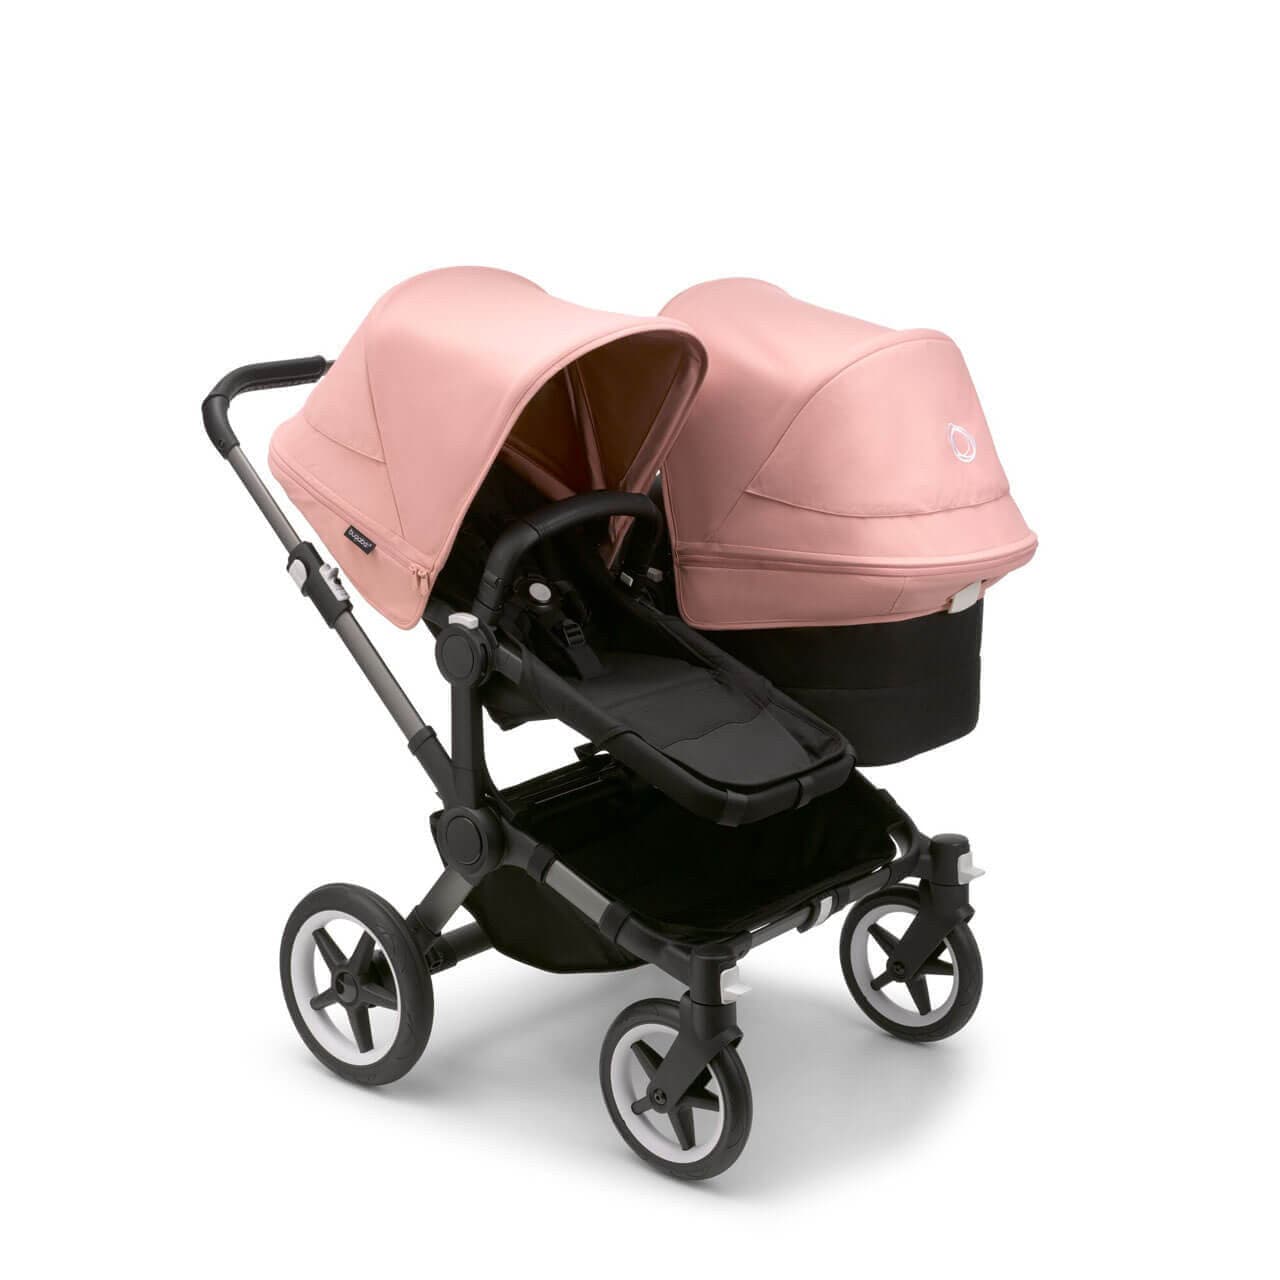 Bugaboo Donkey 5 Duo Pushchair on Graphite/Black Chassis - Choose Your Colour - Morning Pink | For Your Little One